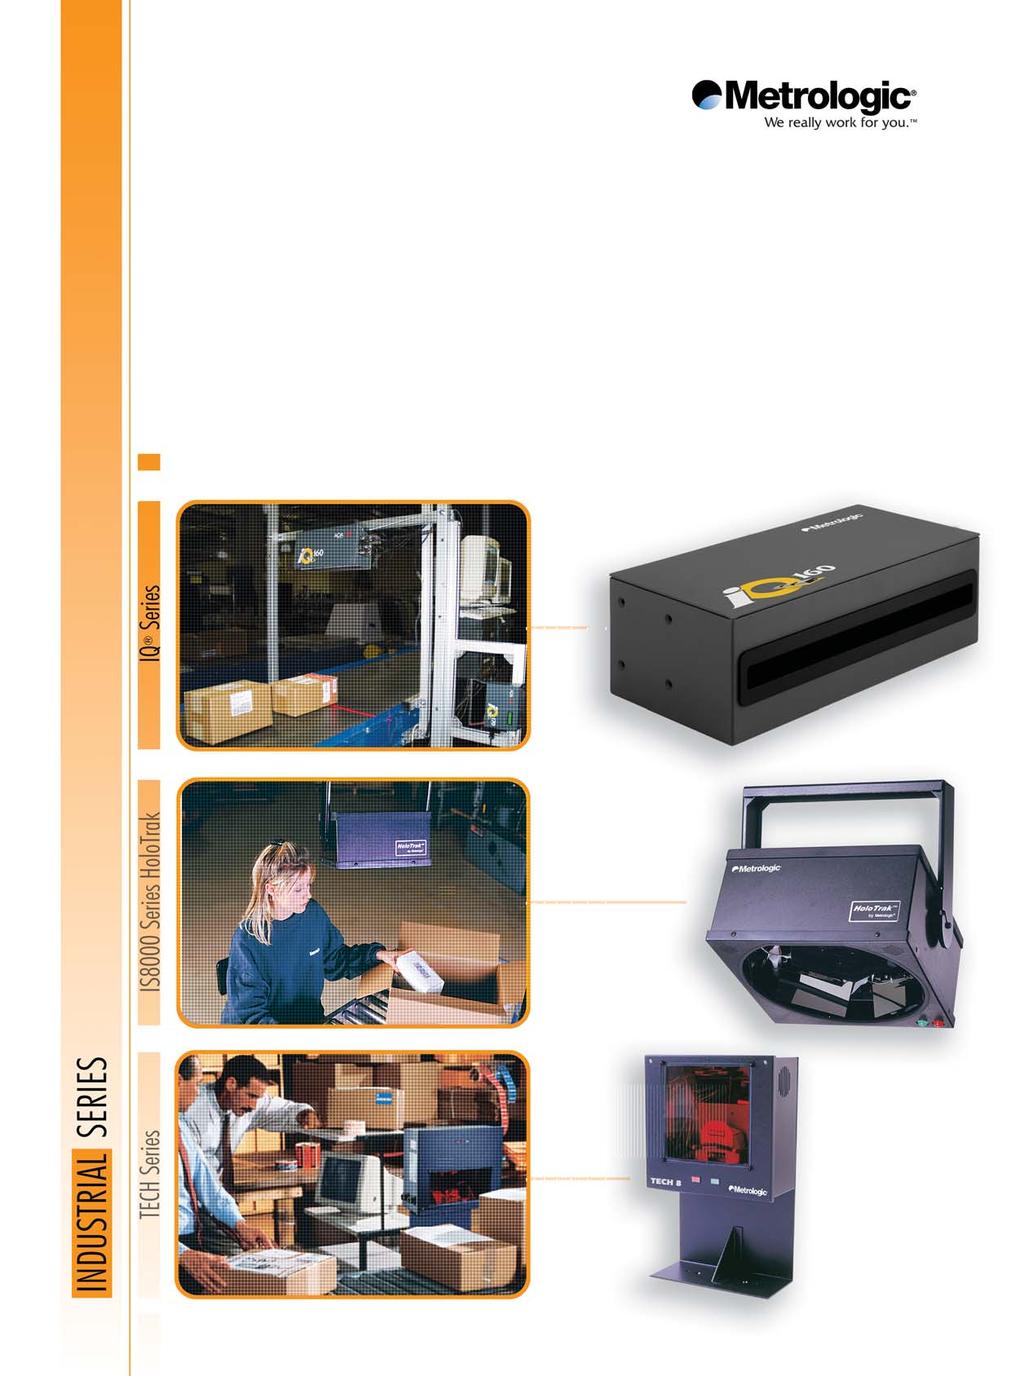 INDUSTRIAL SCANNERS AND SYSTEMS Metrologic Instruments, Inc. is a global supplier of choice for data capture and collection hardware, optical solutions, and image processing software.